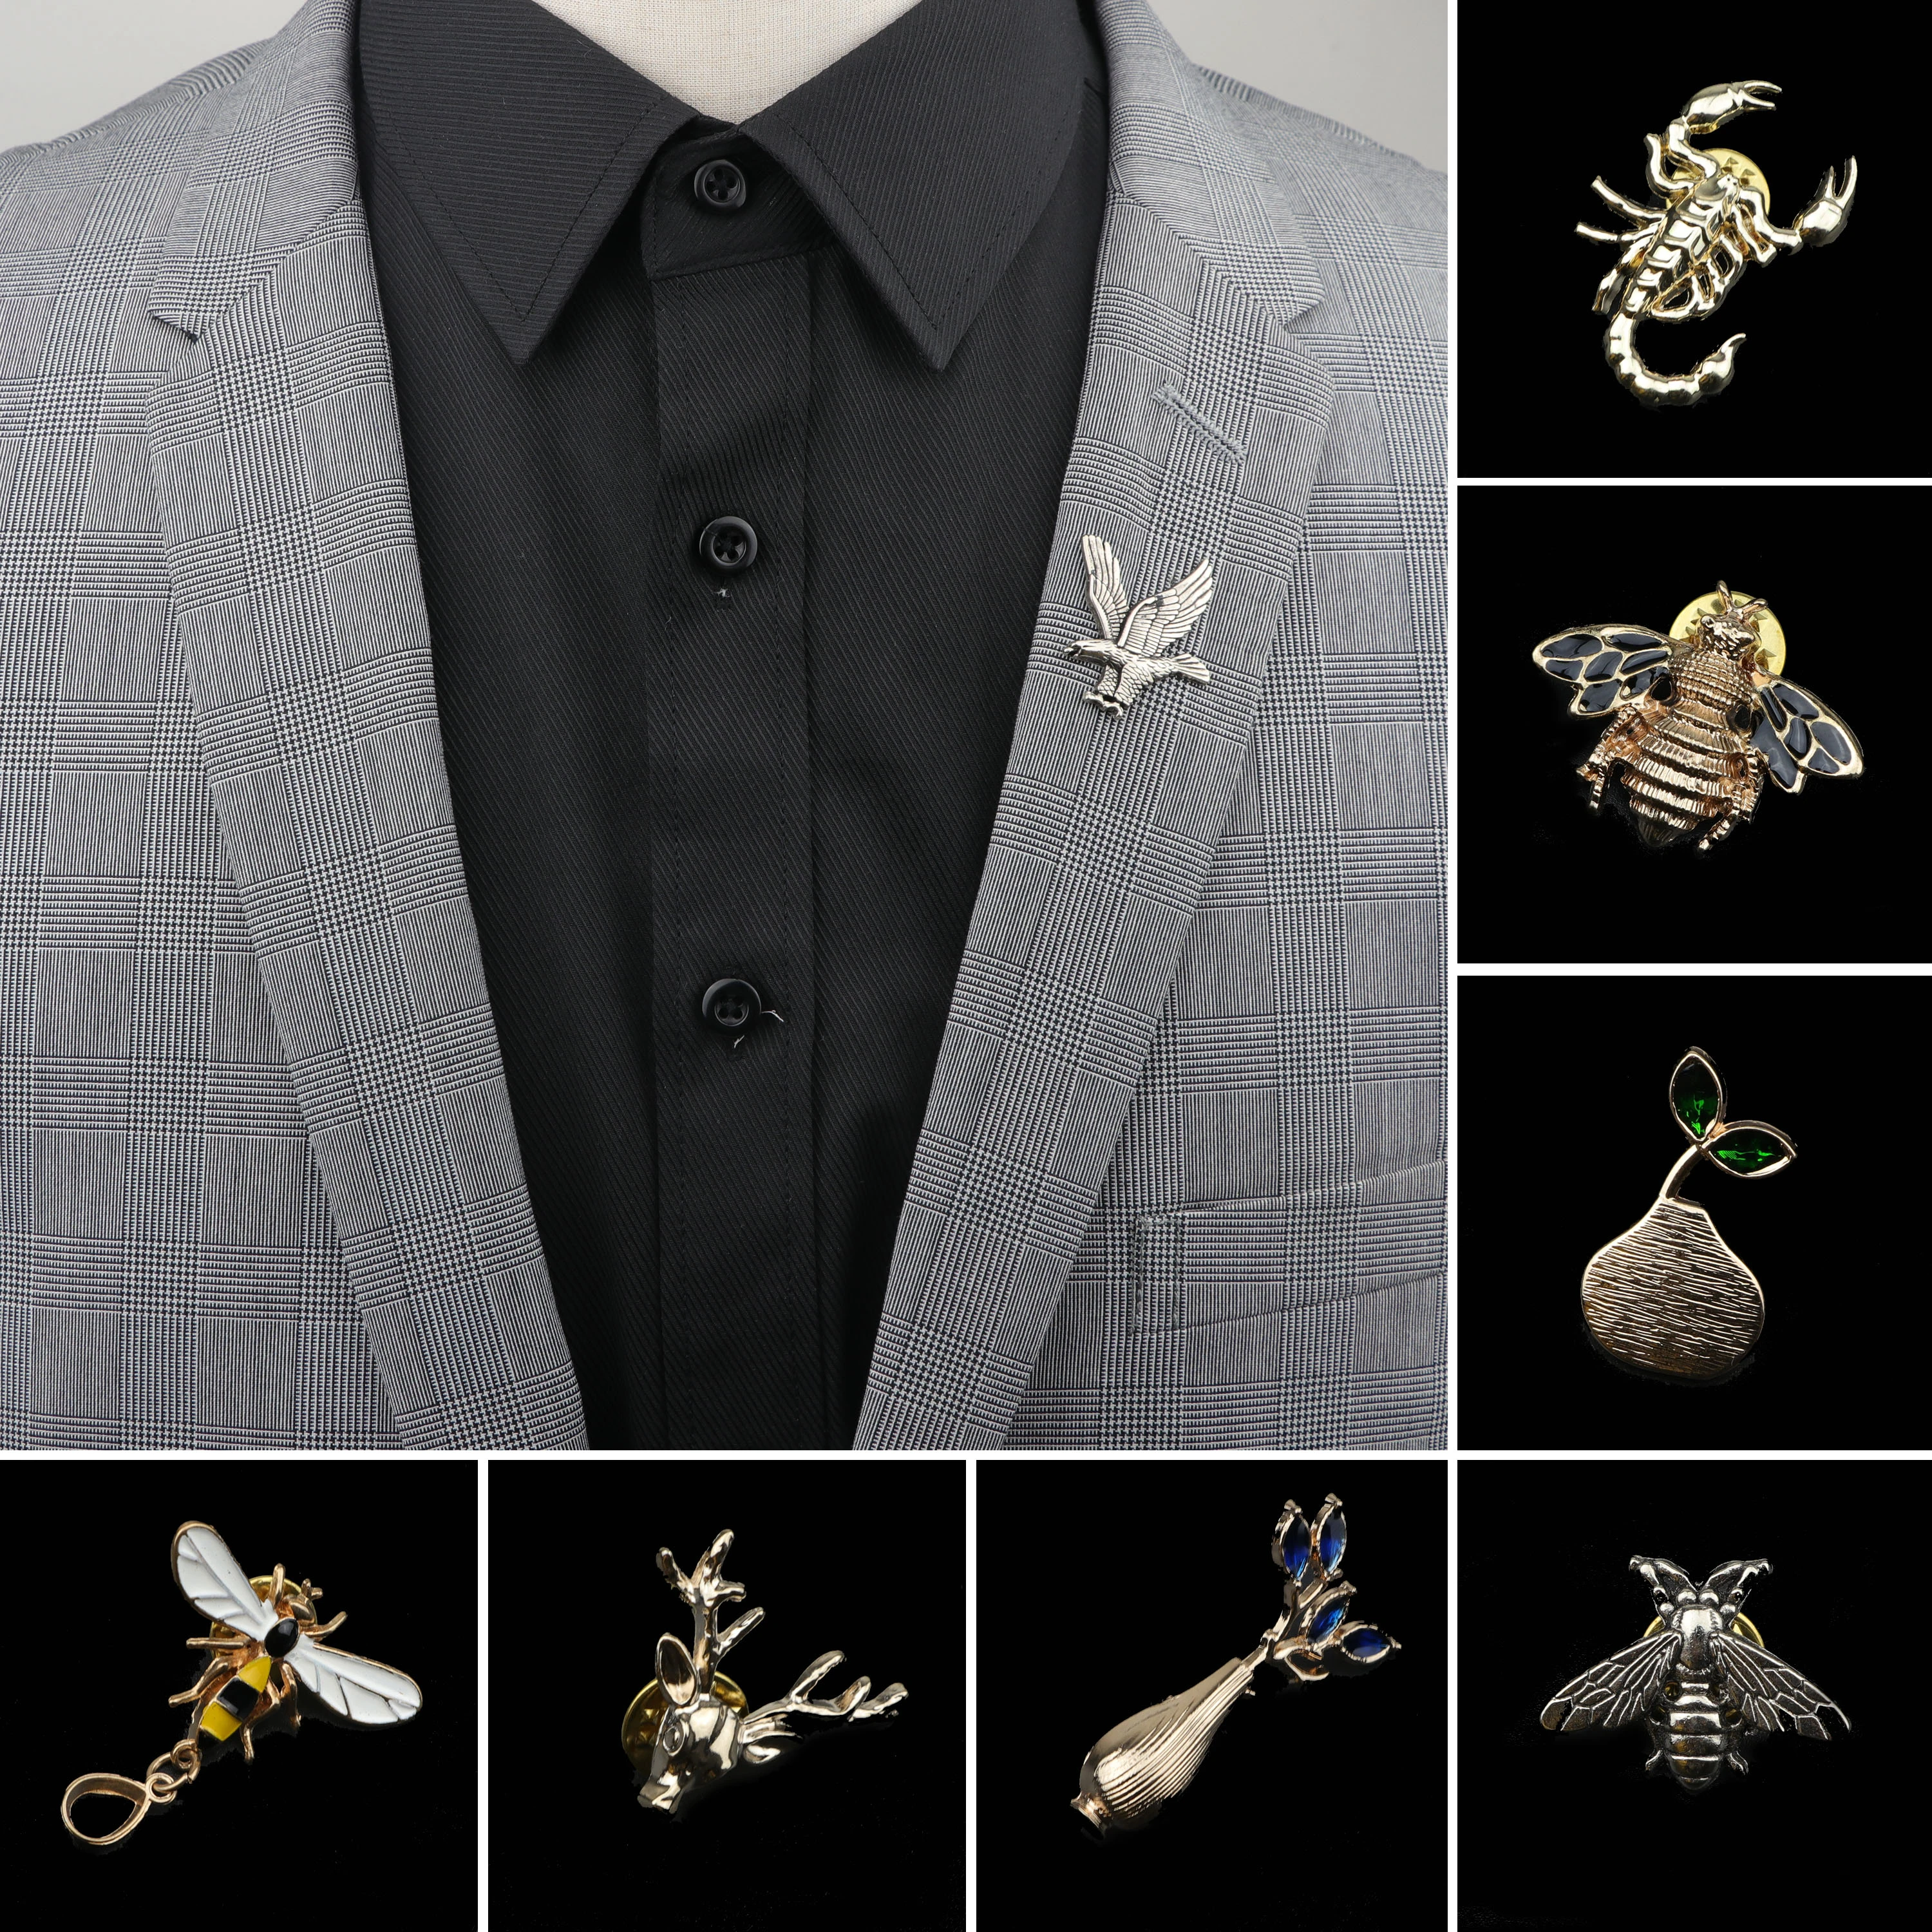 Men's Advanced Retro Animal Anchor Brooch Pins Metal Jewelry Stylish Brooches Collar Breastpin Pin Bee Eagle Scorpion Flower